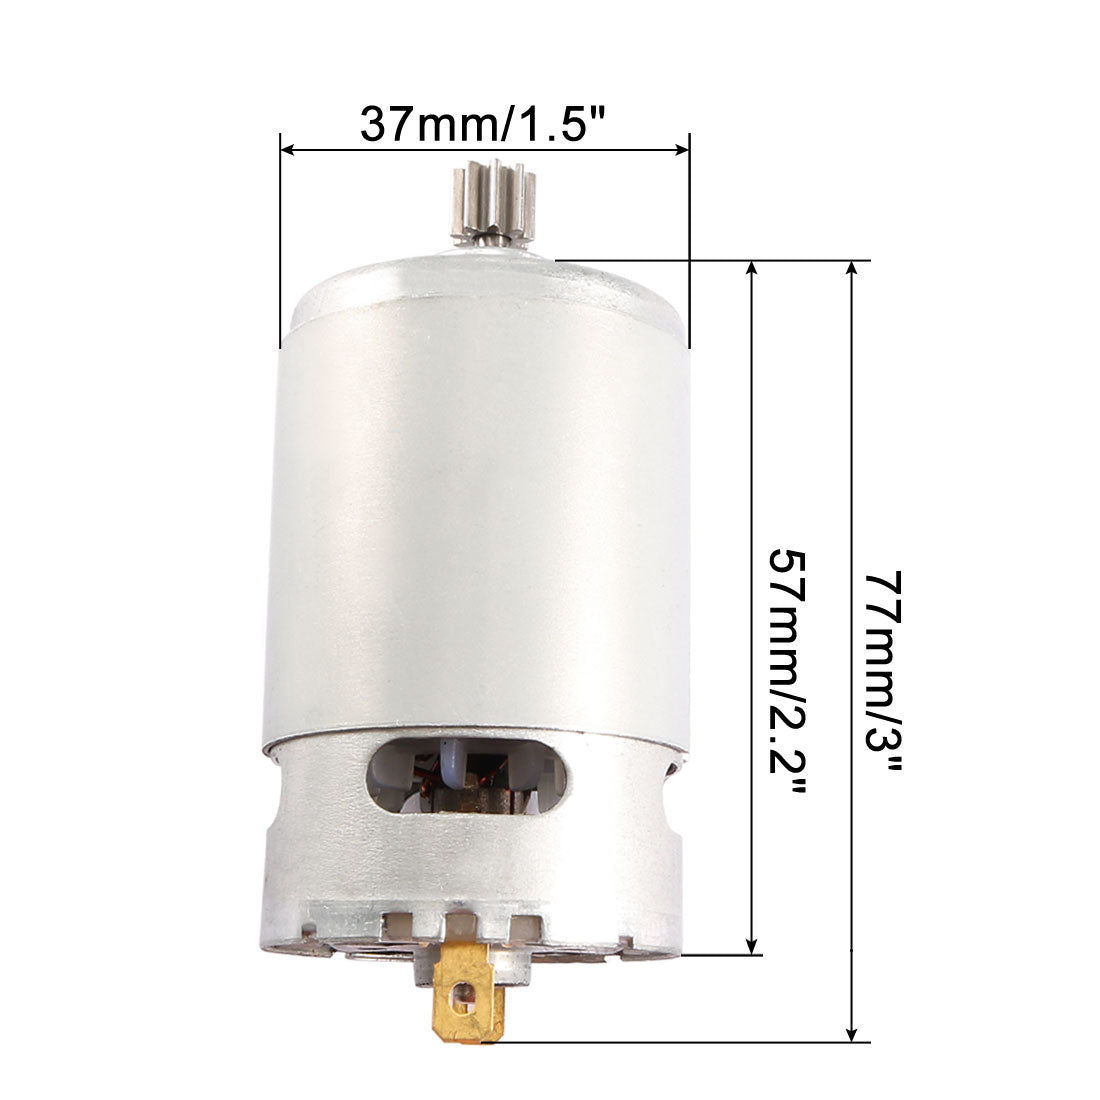 uxcell Uxcell DC 18V 32000RPM 9 Teeth Shank Gear Motor Replacement for Rechargeable Electric Drill